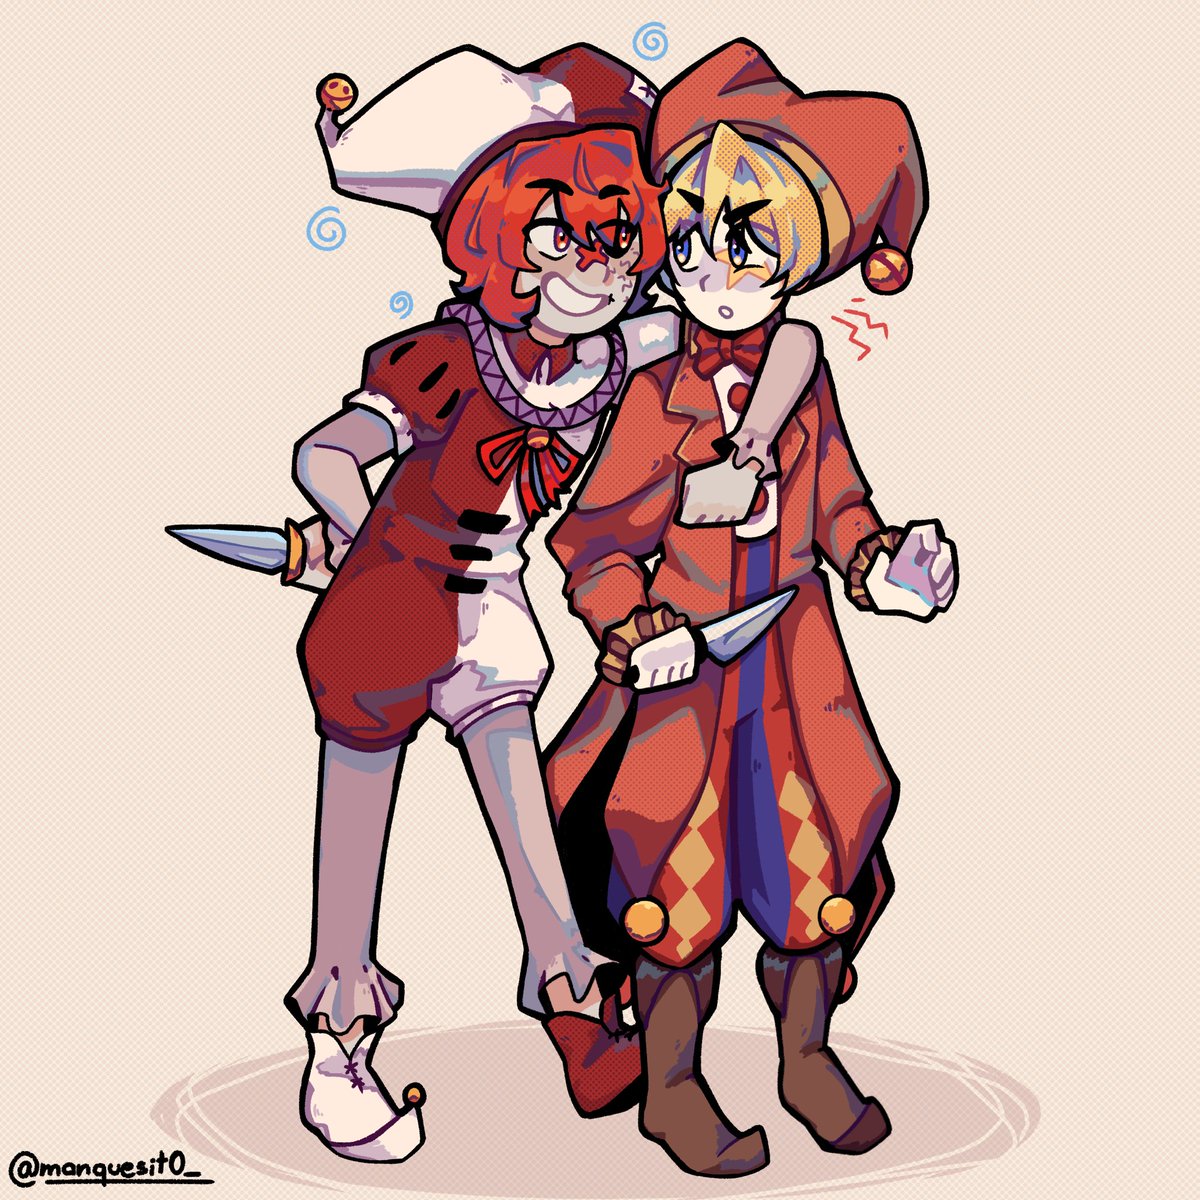 The Court Jester and the Fifth Pierrot 

#evilliouschronicles #lenkagamine #fukasevocaloid